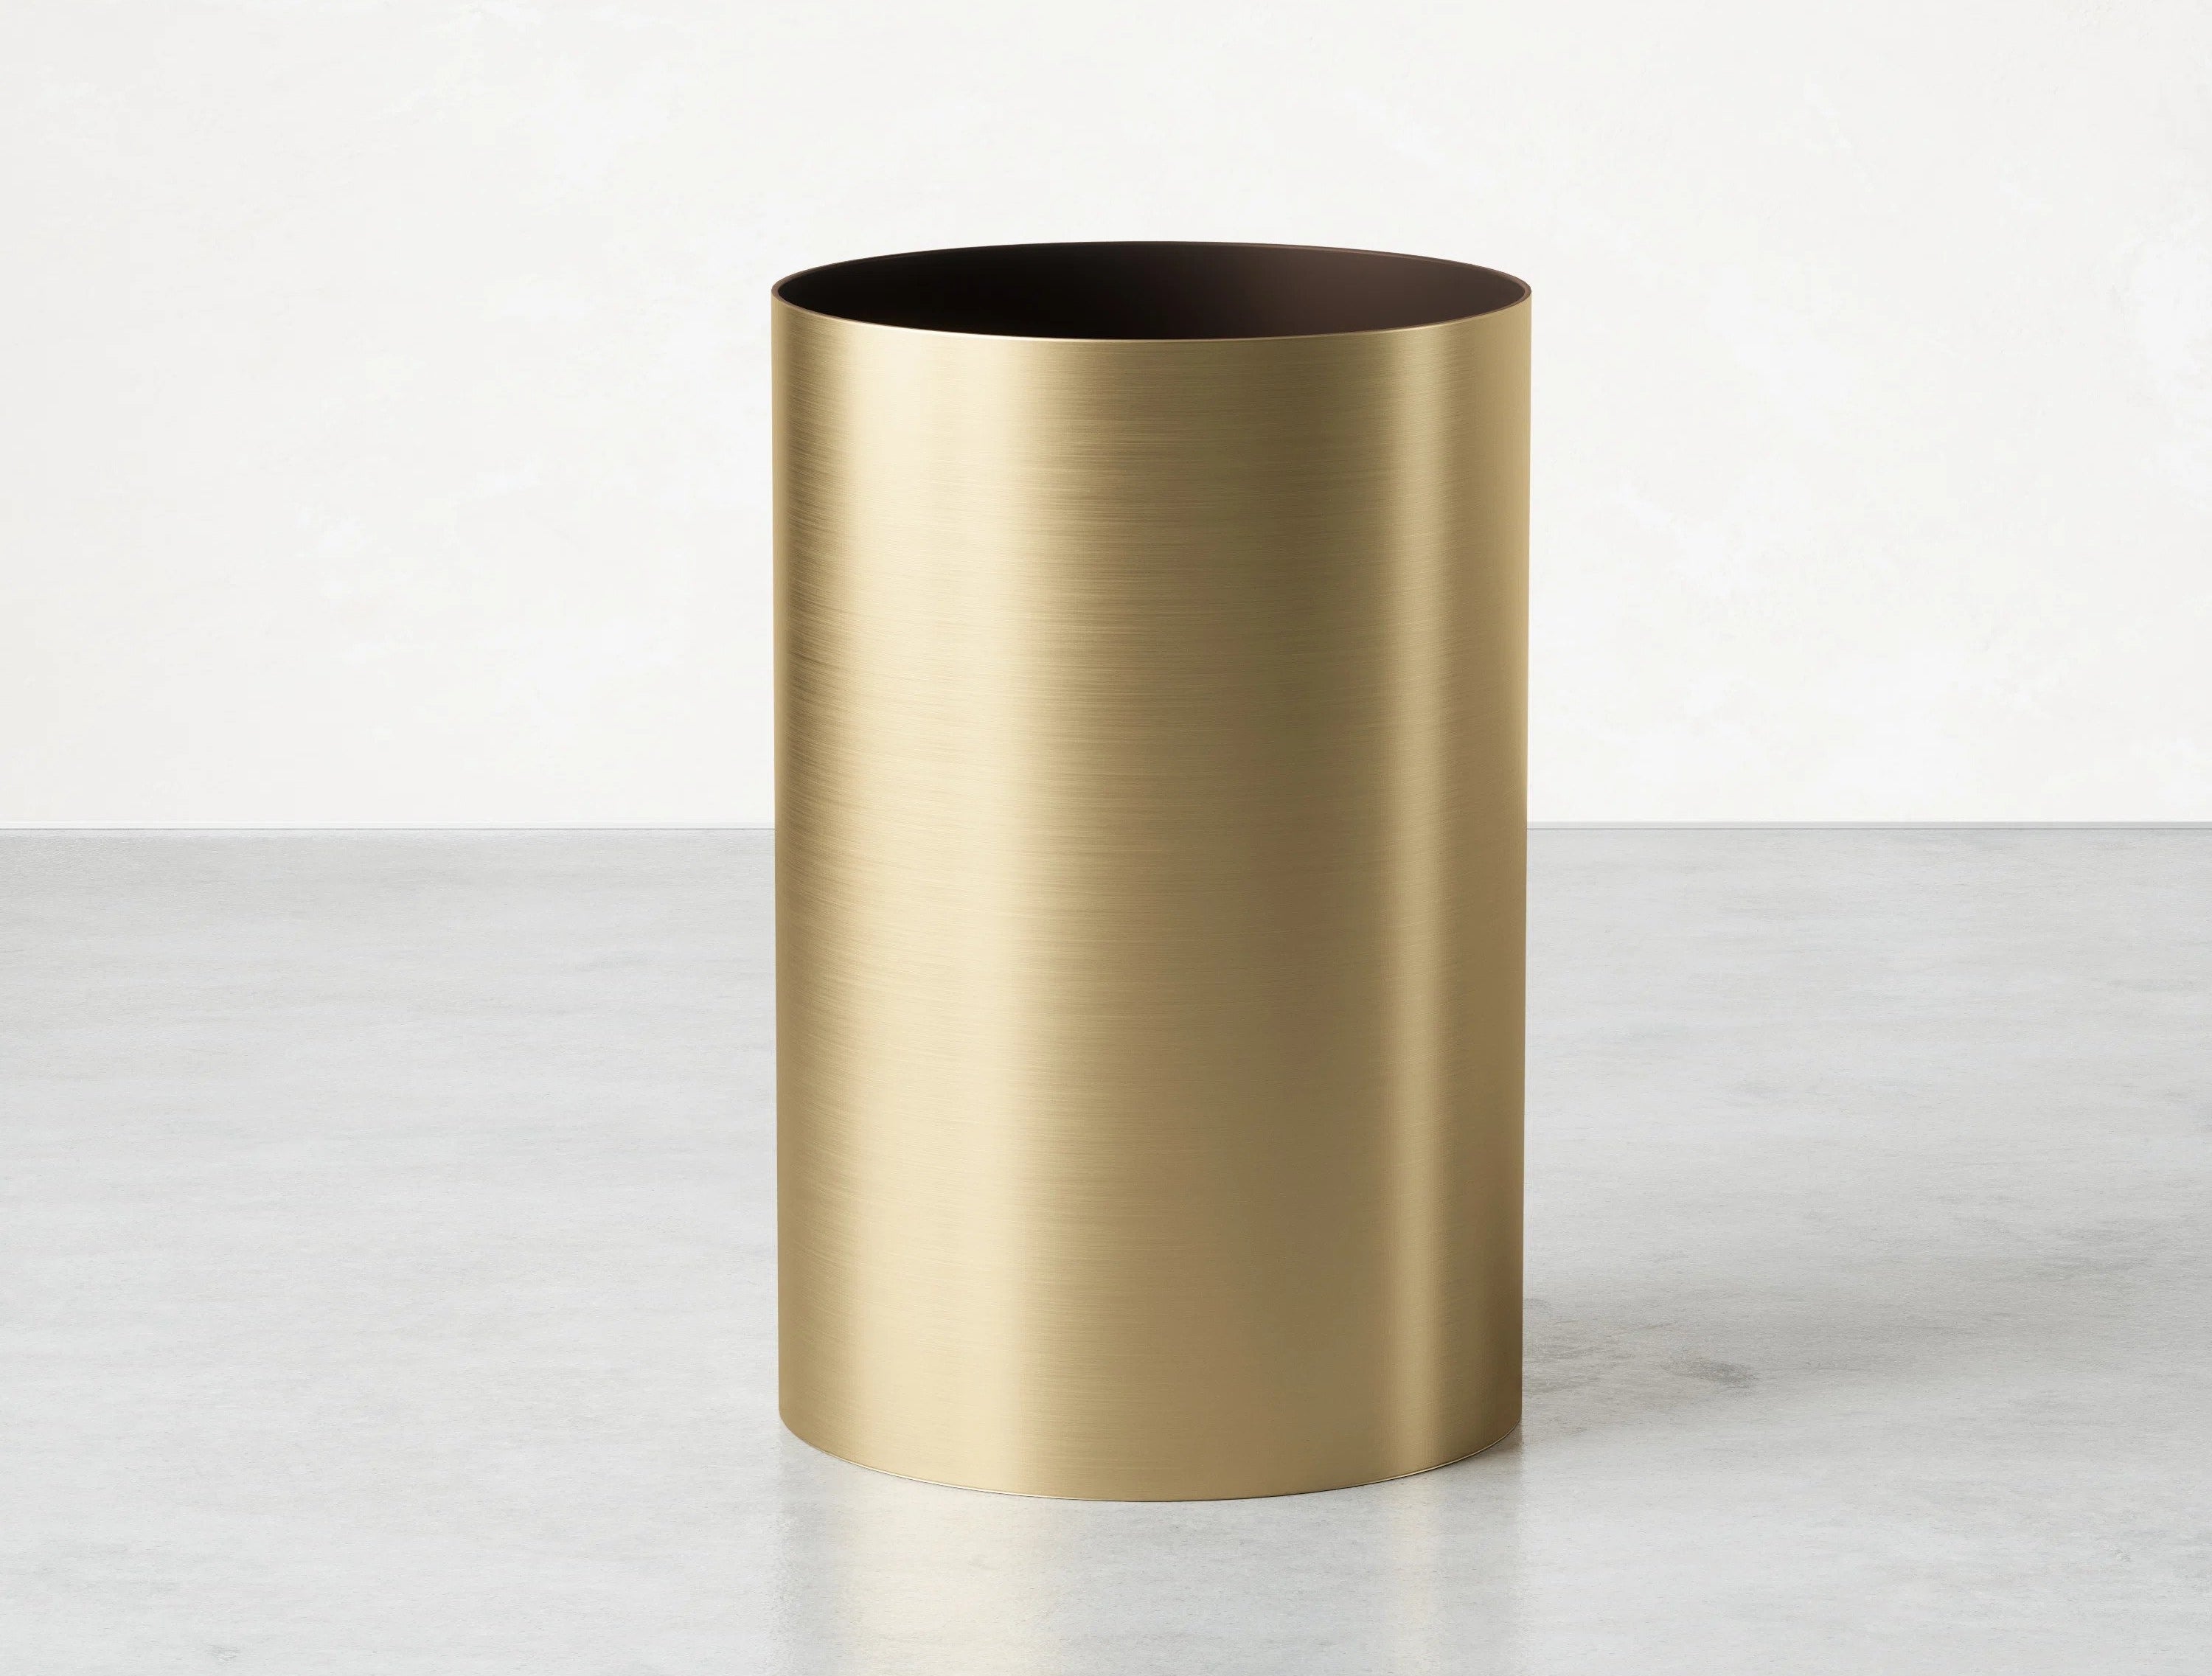 The lidless brass trash can